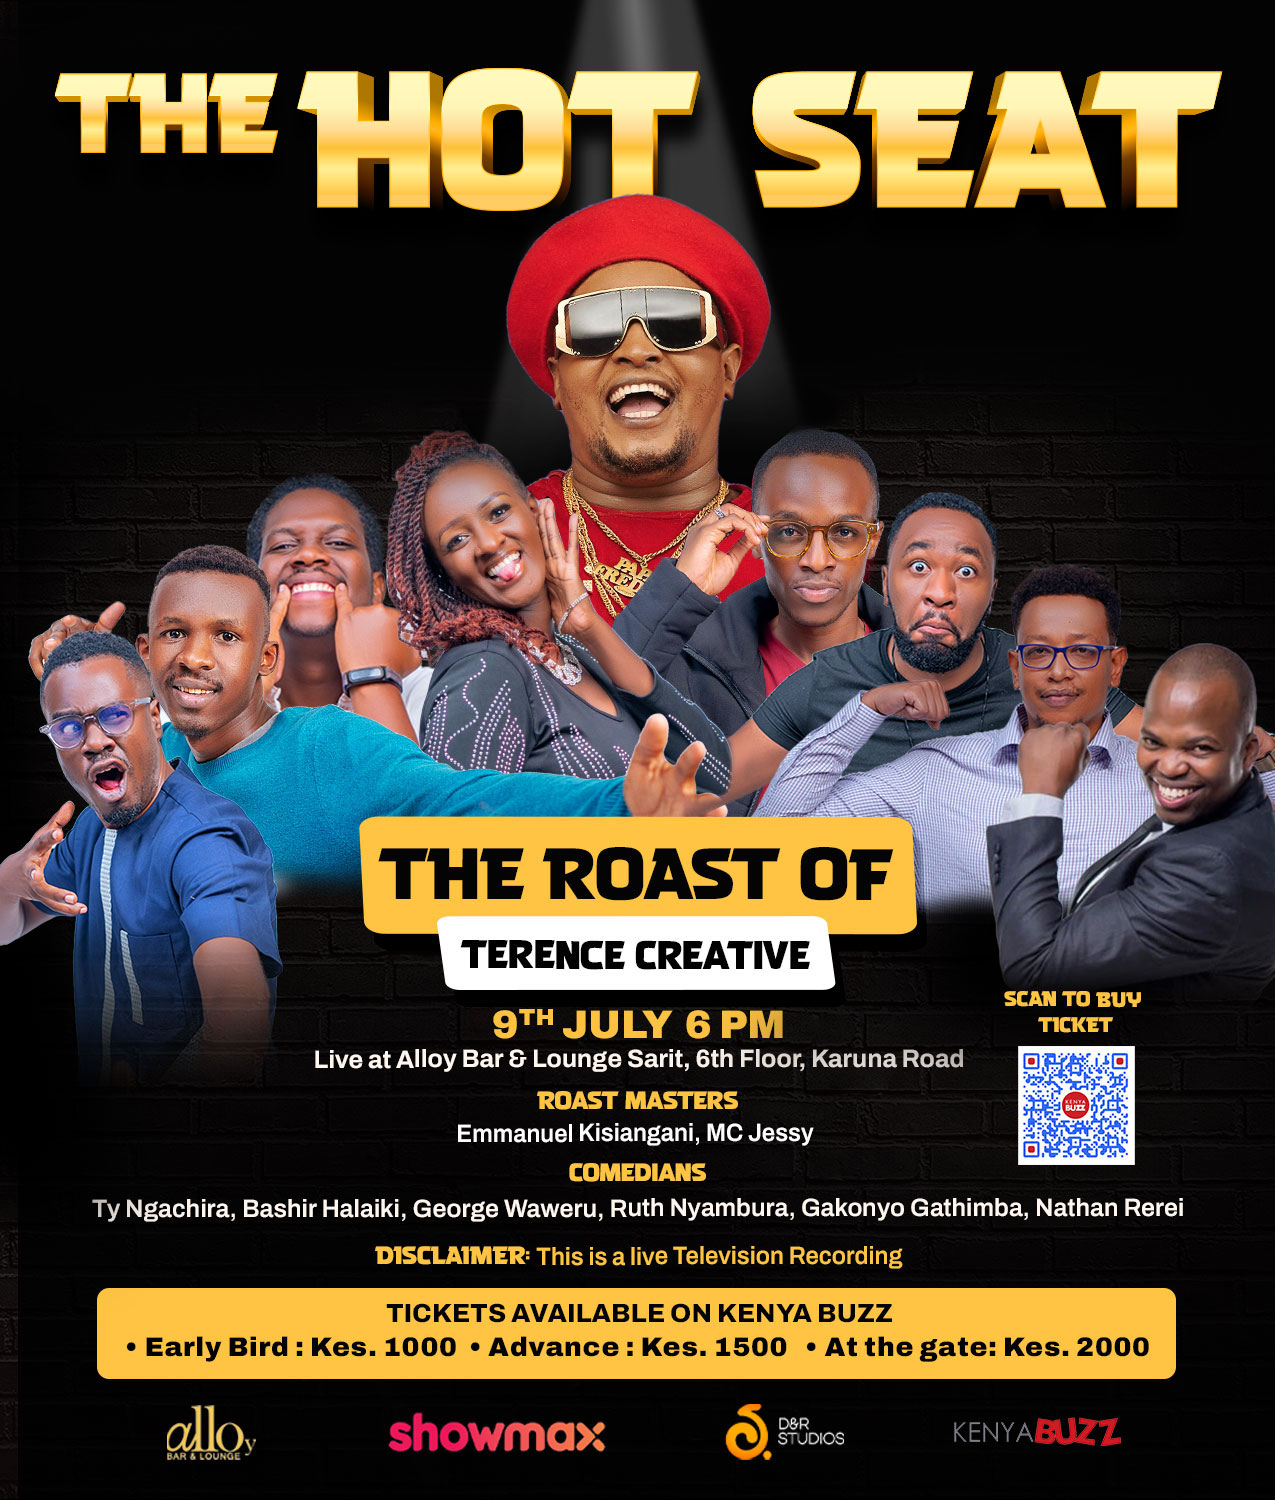 The Hot Seat- The Roast Of Terence